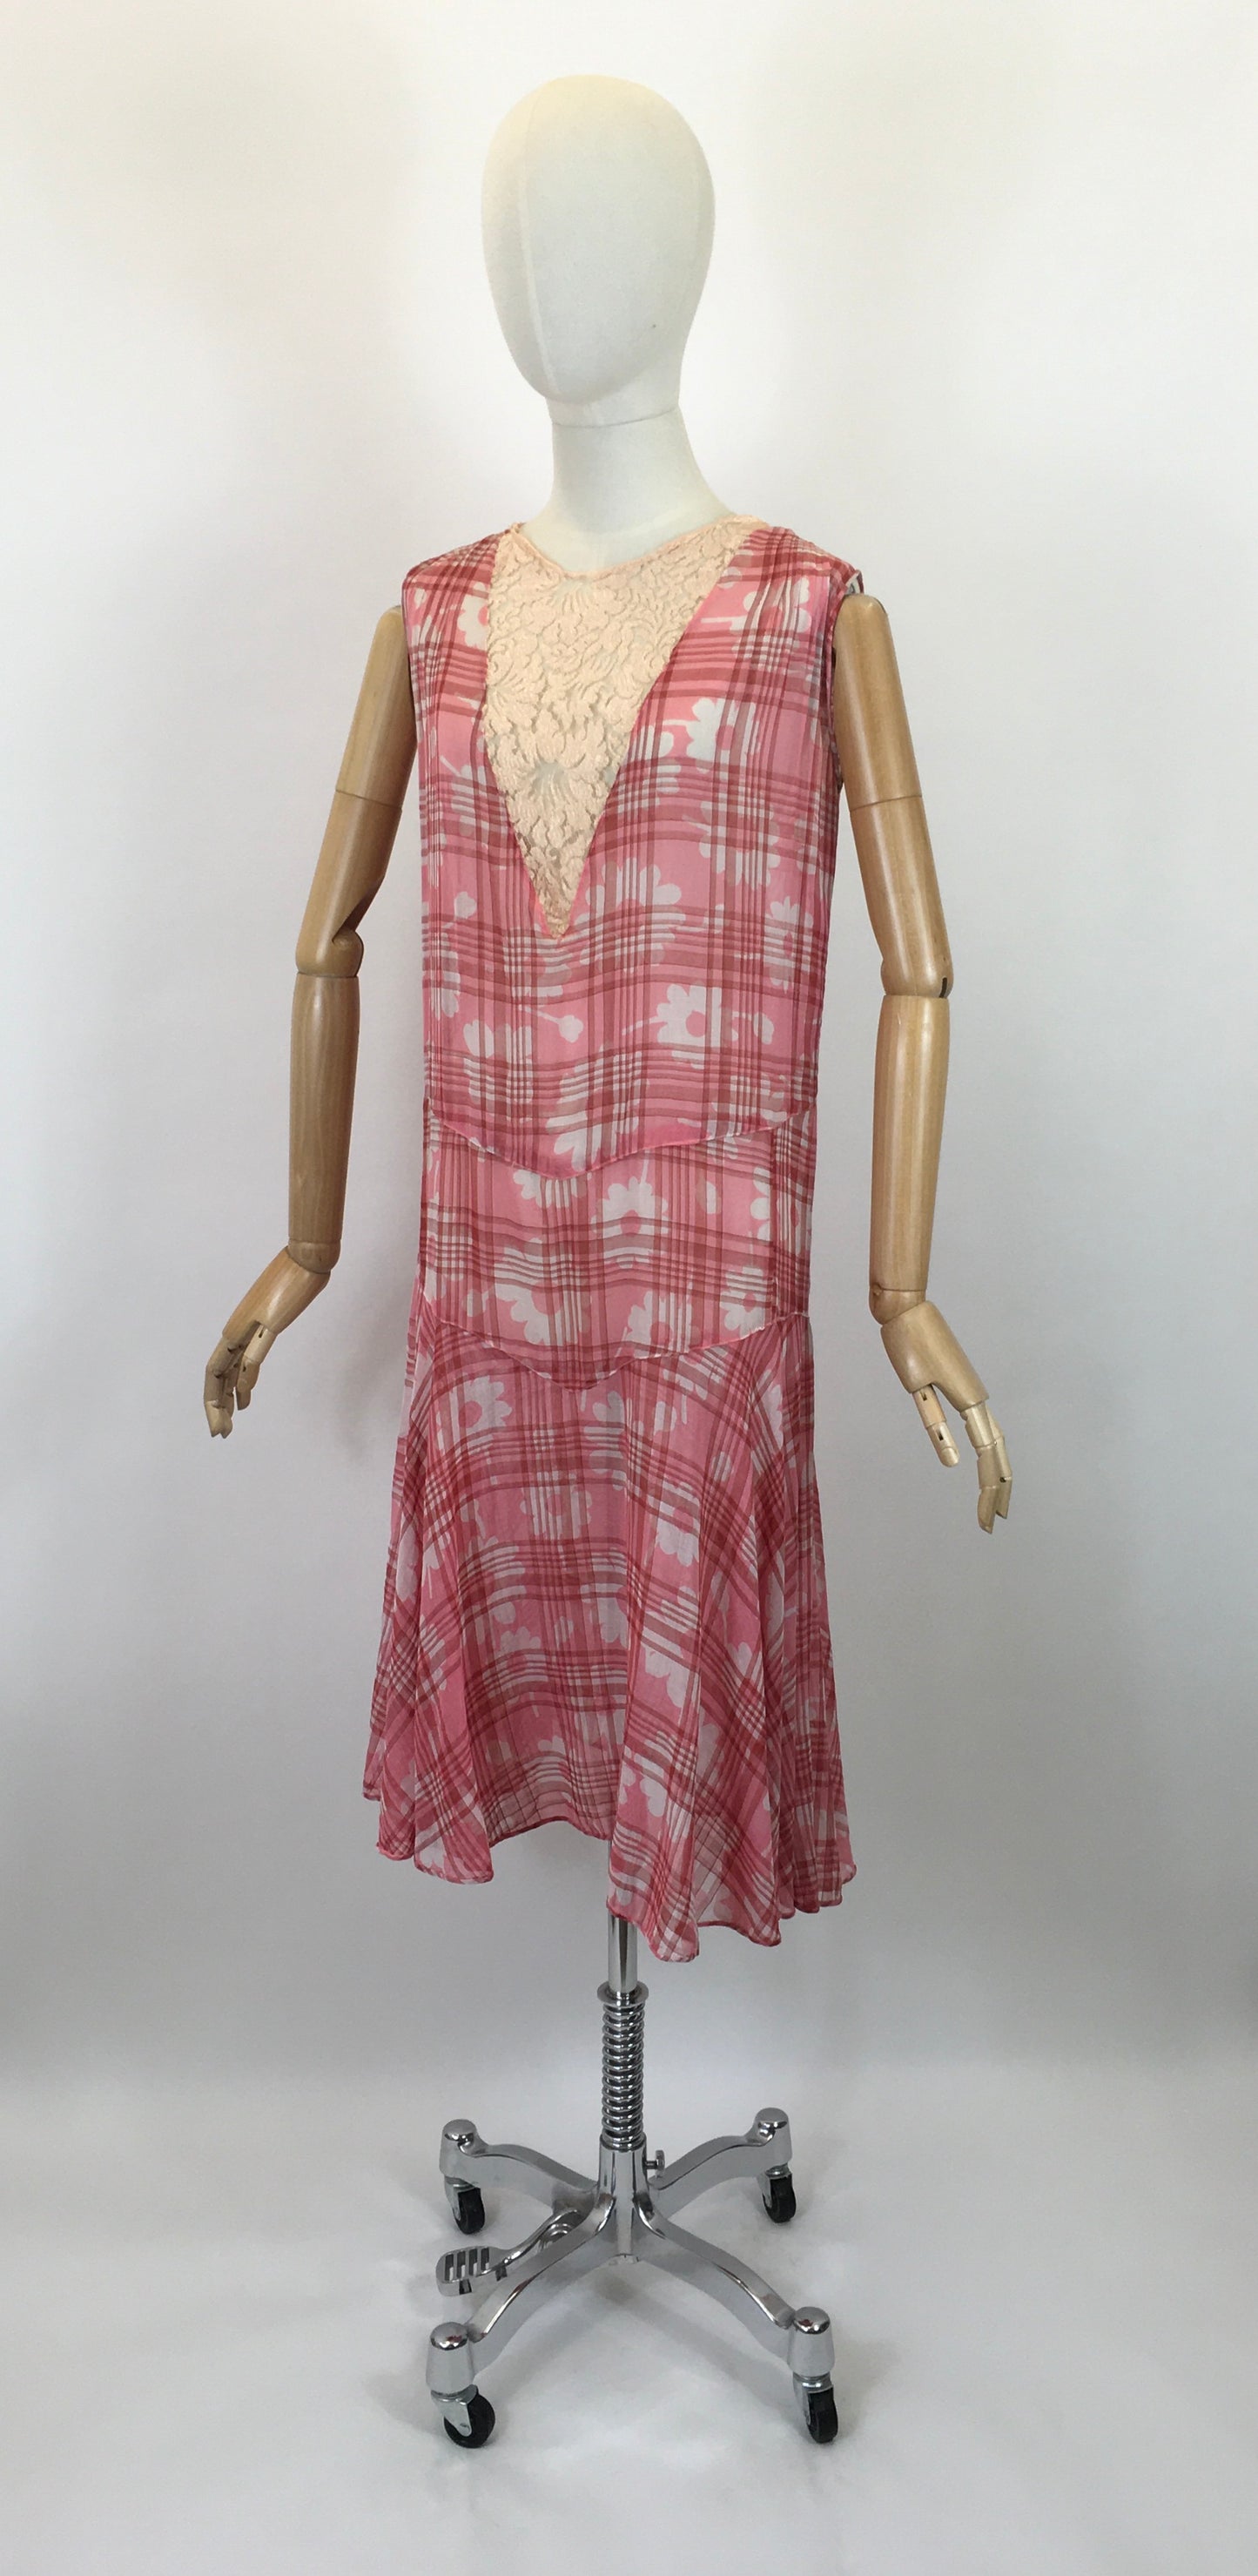 Original 1920's Darling Cotton Lawn Day Dress - In A Rose Pink Floral and Plaid Cloth